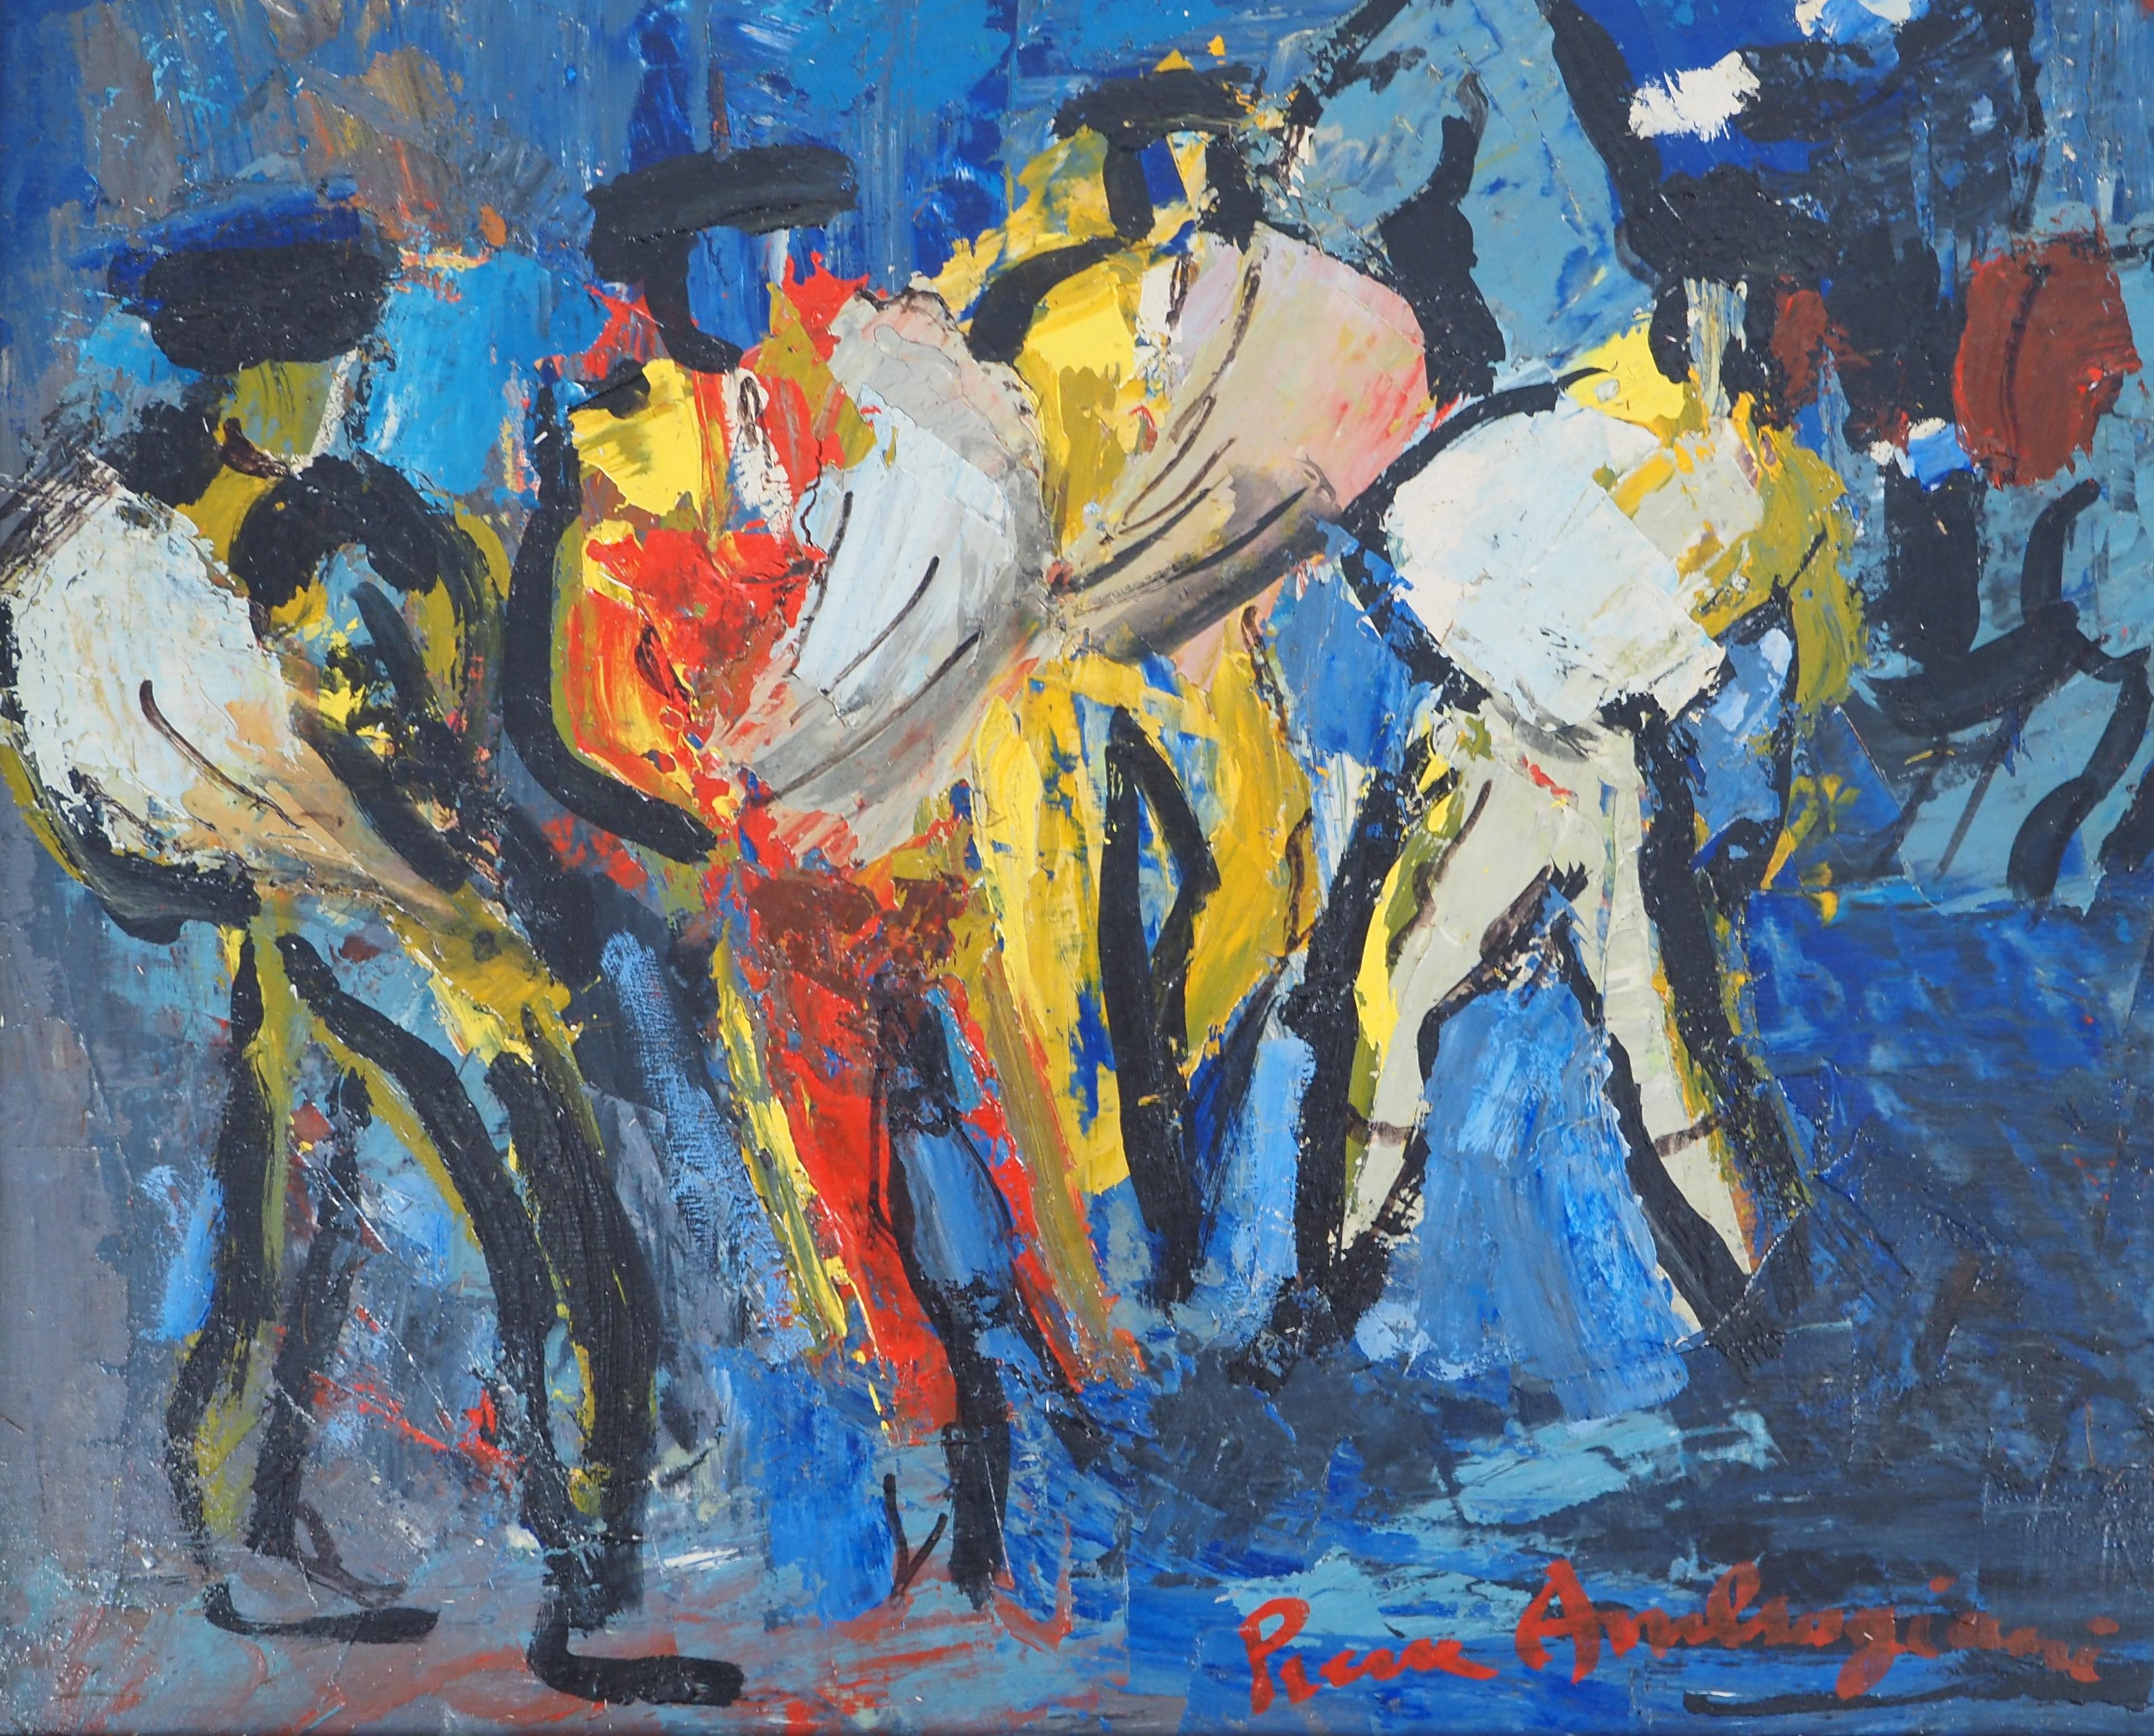 Colorful Torero - Original Oil on Canvas, Signed and Framed - Fauvist Painting by Pierre Ambrogiani